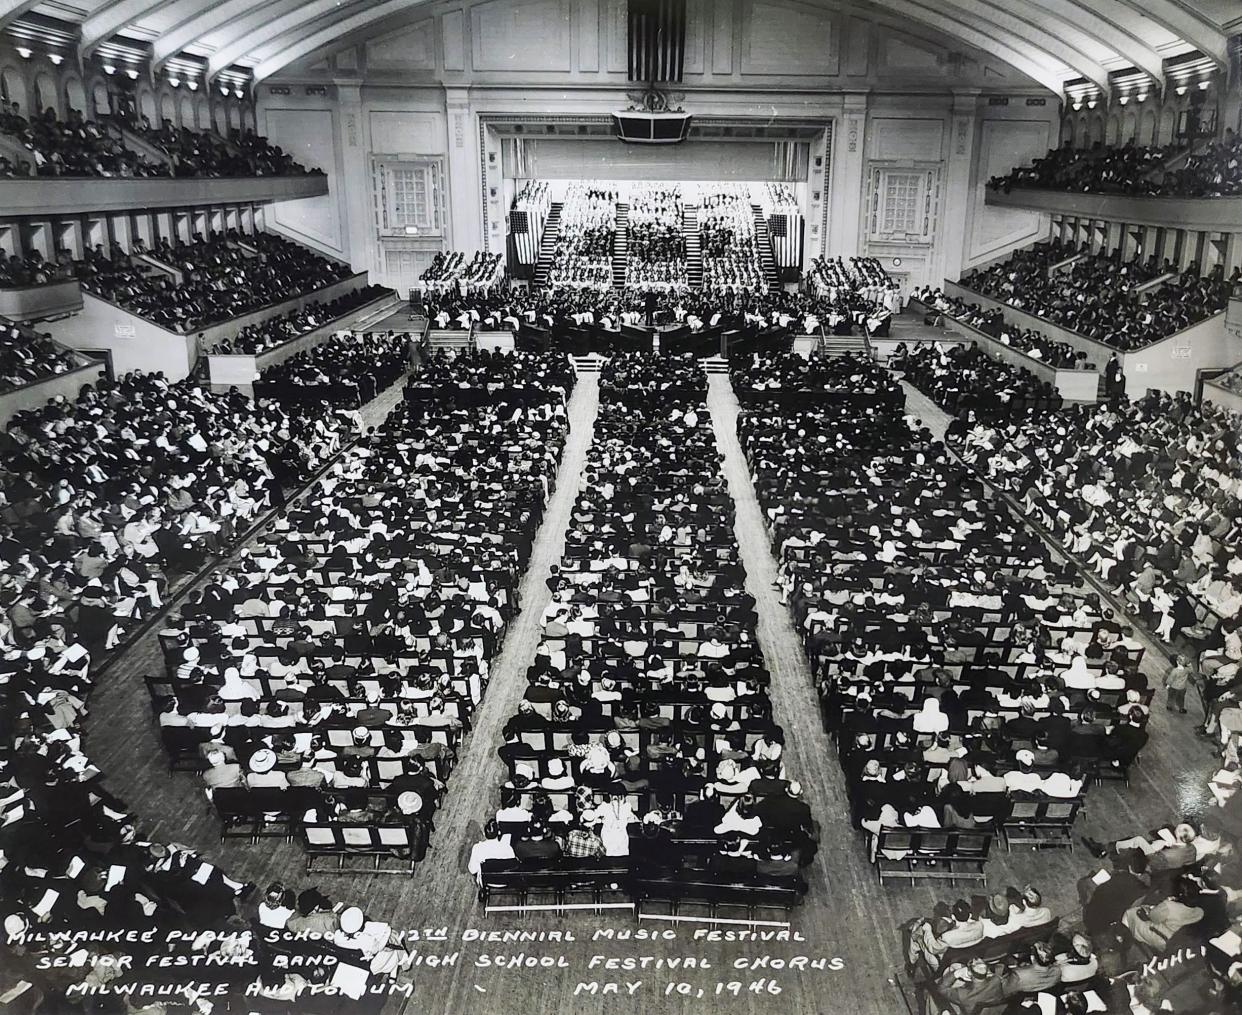 A photo from 1946 shows MPS' Biennial Music Festival. The first festival was in 1924. The district will be celebrating 100 years of festivals this May.